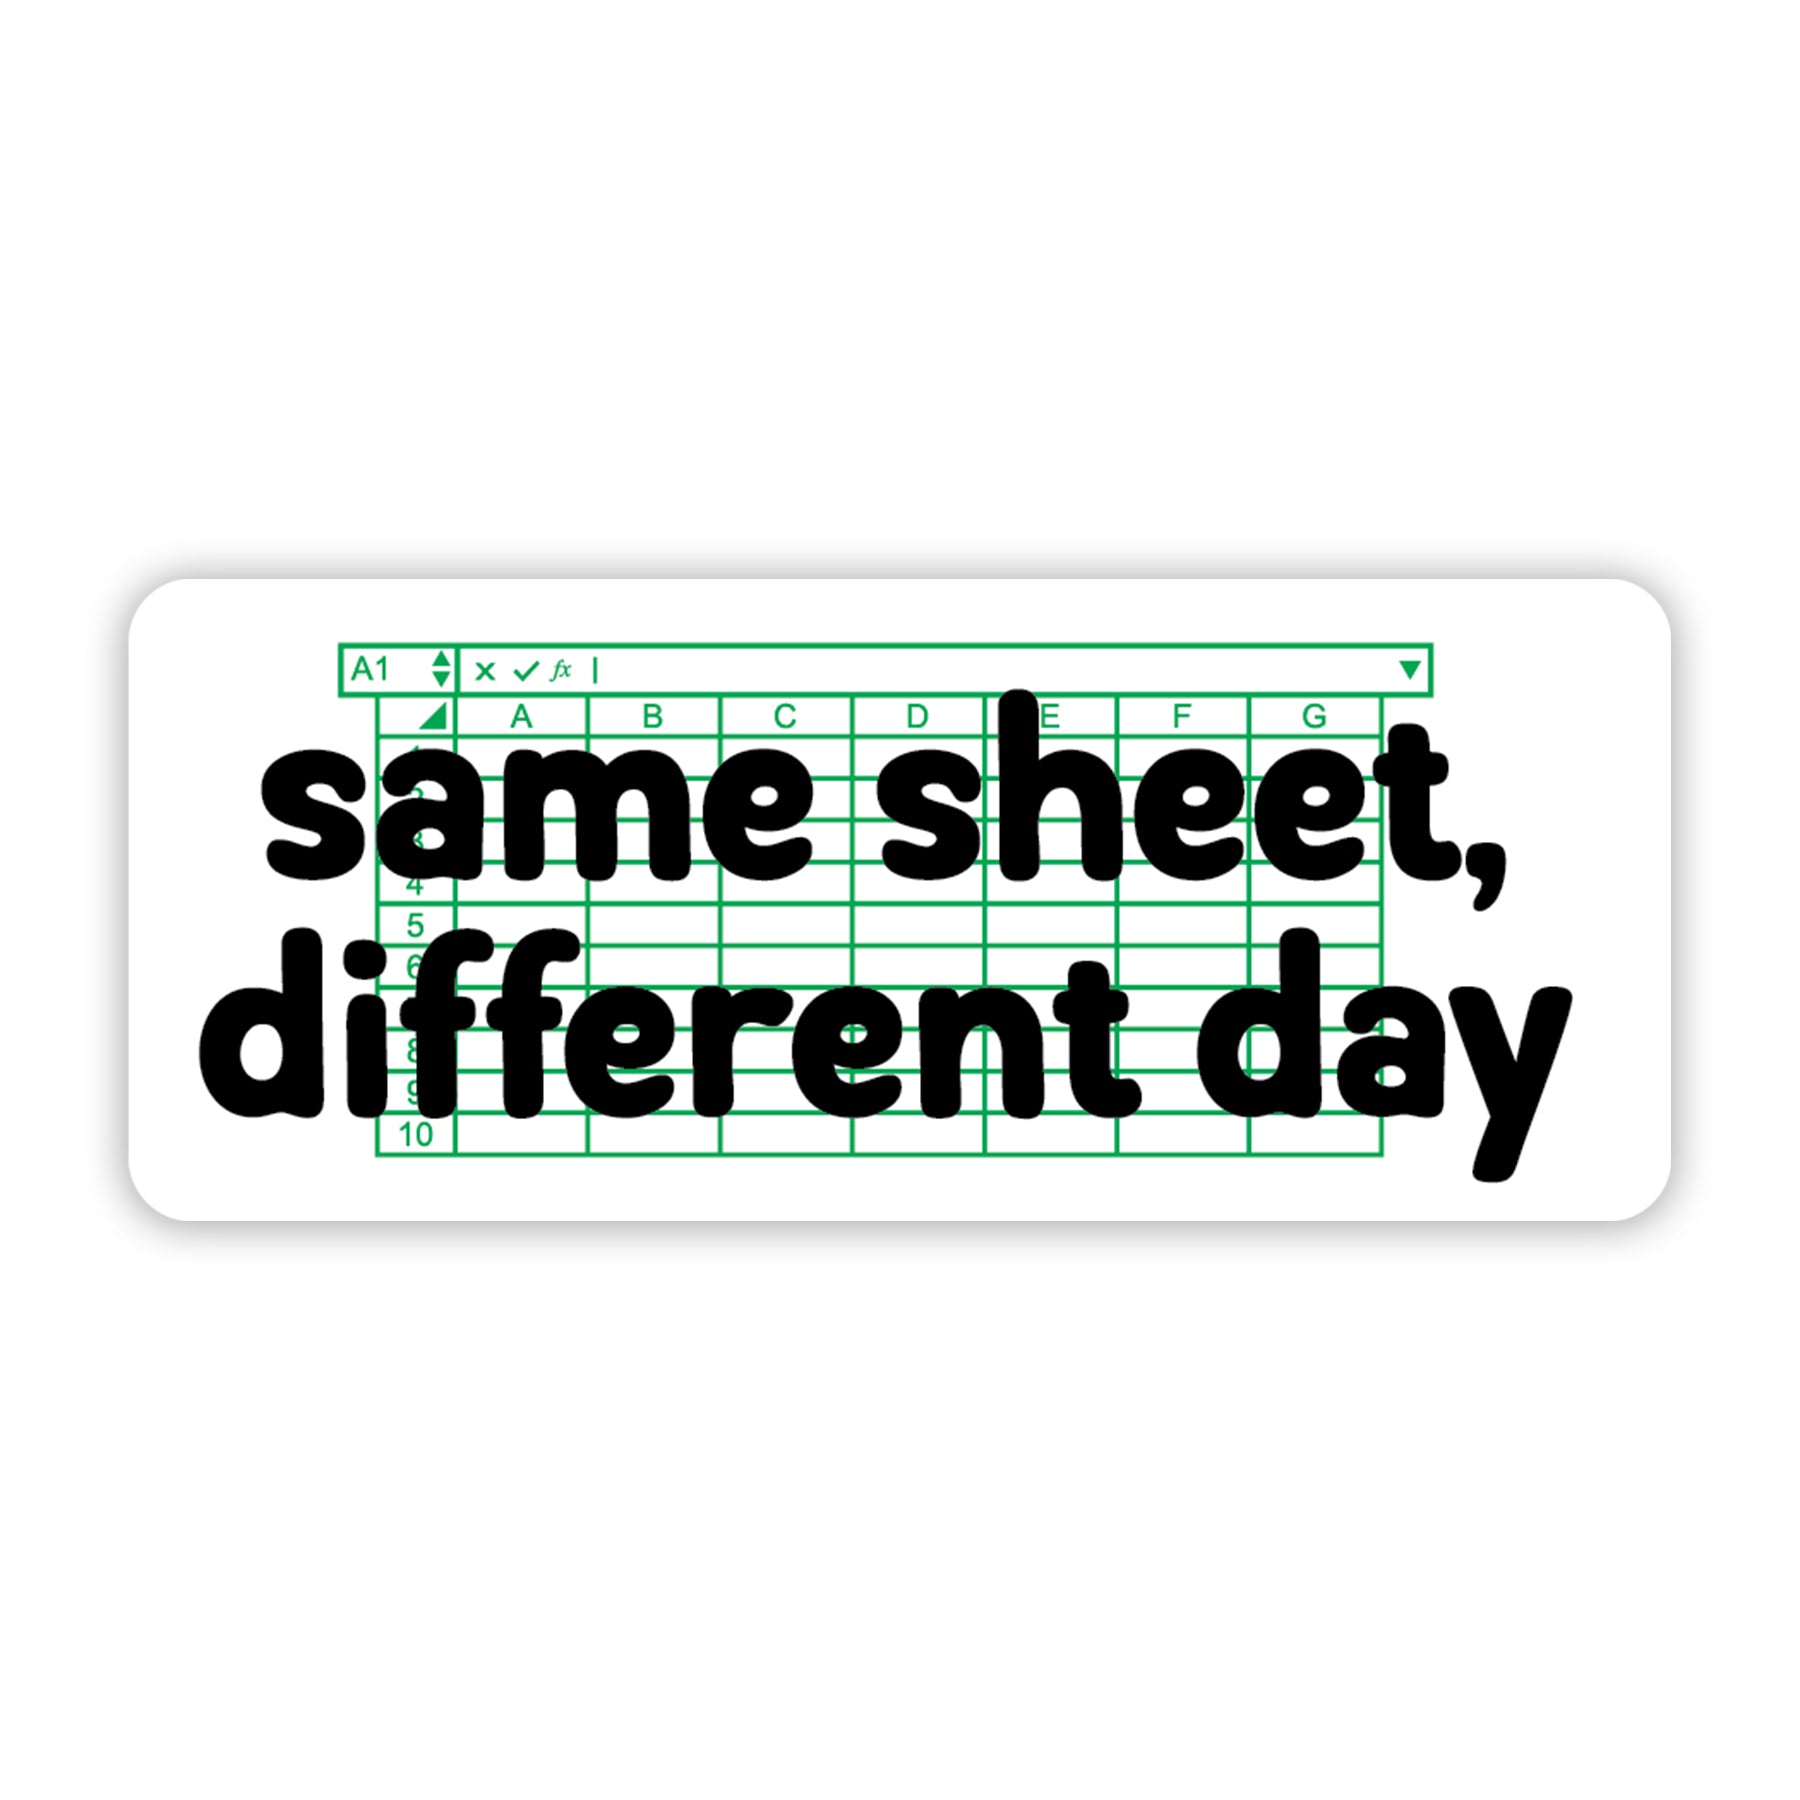 Same Sheet Different Day Stickers - 5 Pack